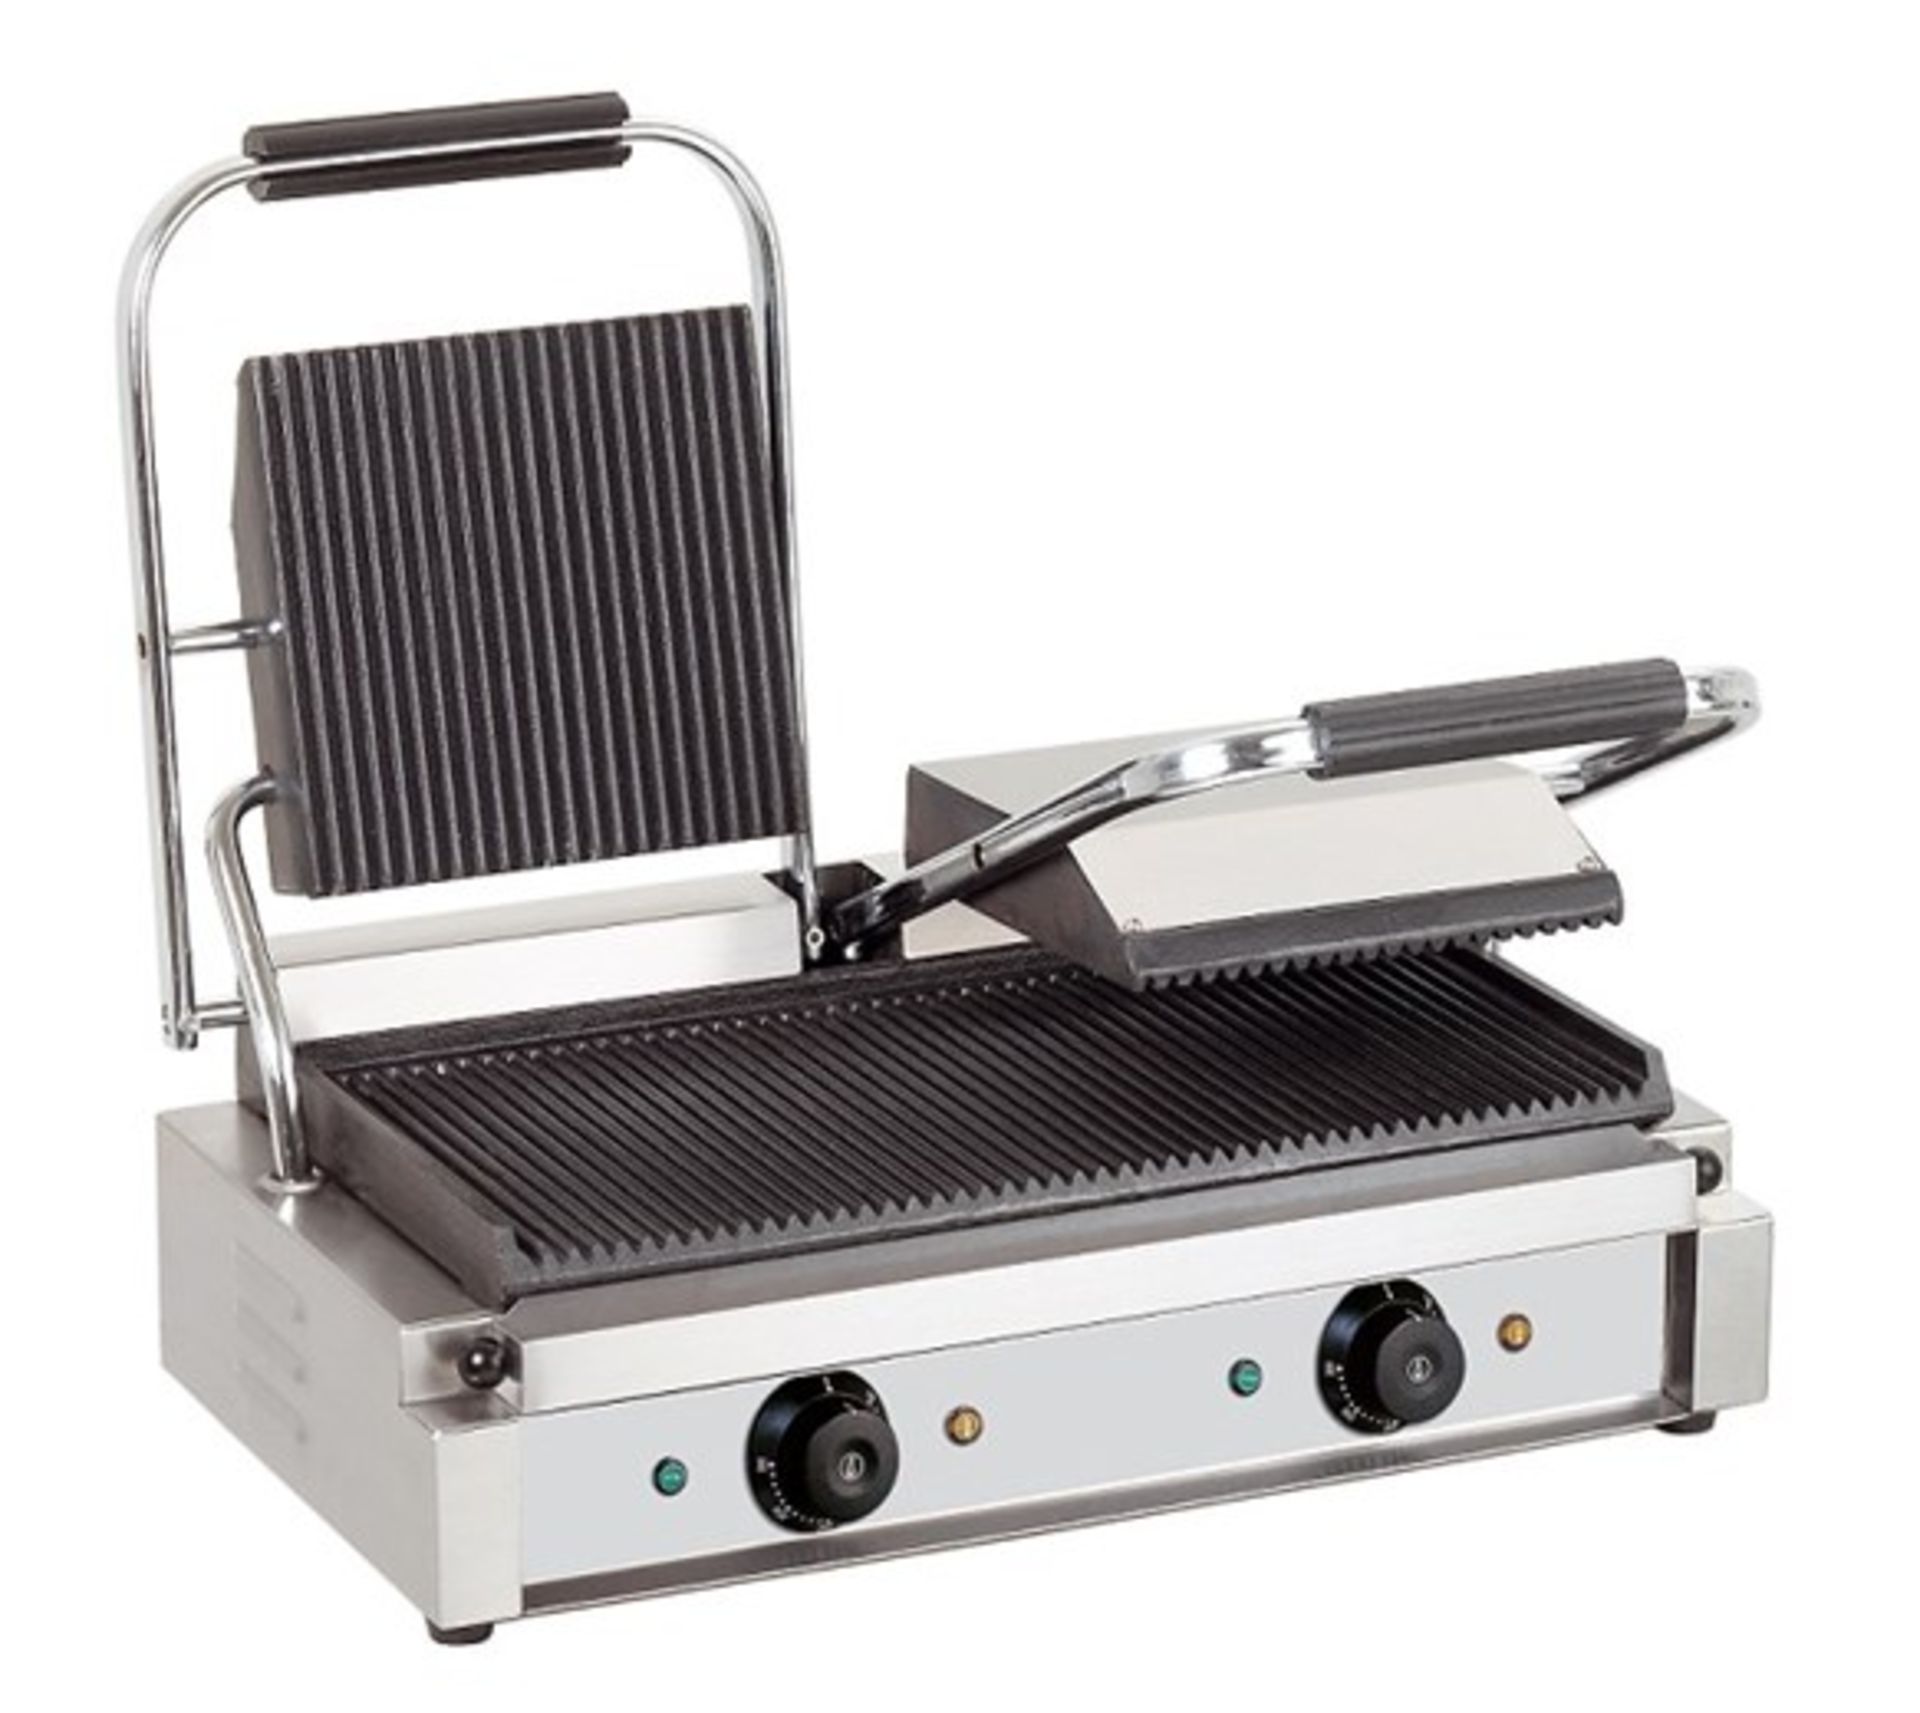 New Heavy-Duty Contact Grill, comes with ribbed top and bottom plates. on/ off button-integral